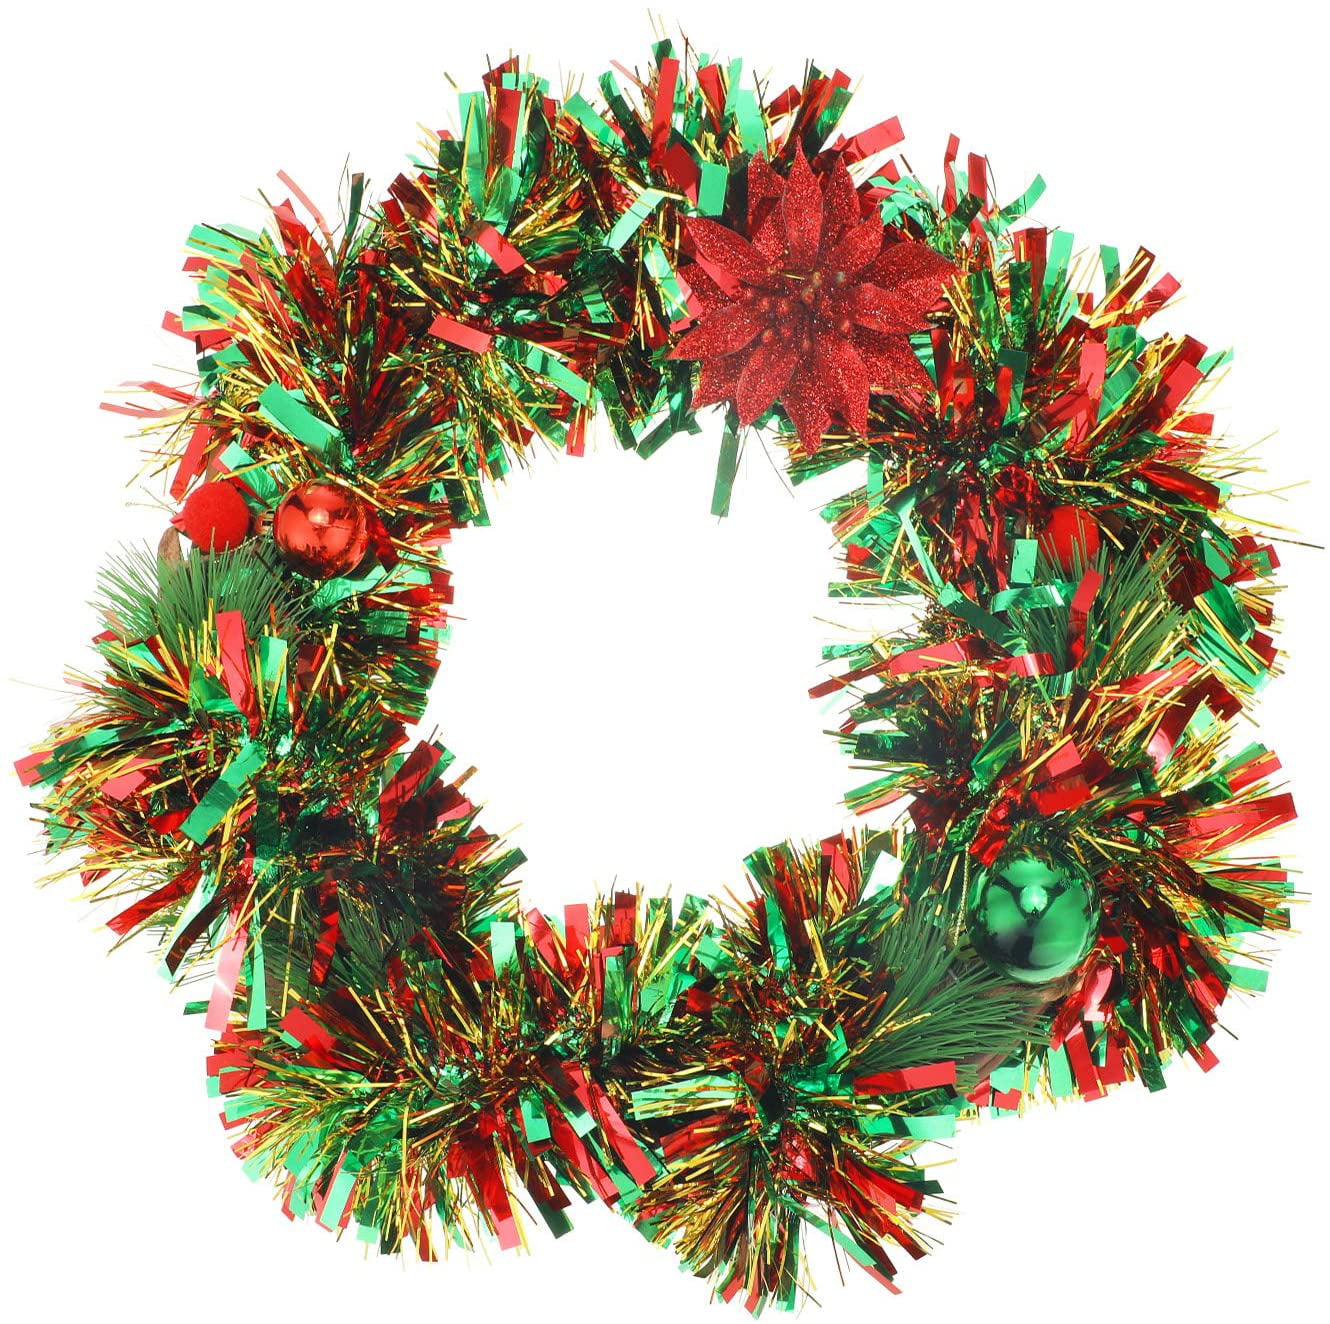 4 Pieces 66 Feet Christmas Tinsel Garland Red Green and Gold Metallic Holiday Tinsel Twist Garland Christmas Tree Decoration for Christmas Party Classroom Home Indoor Outdoor Hanging Ornaments